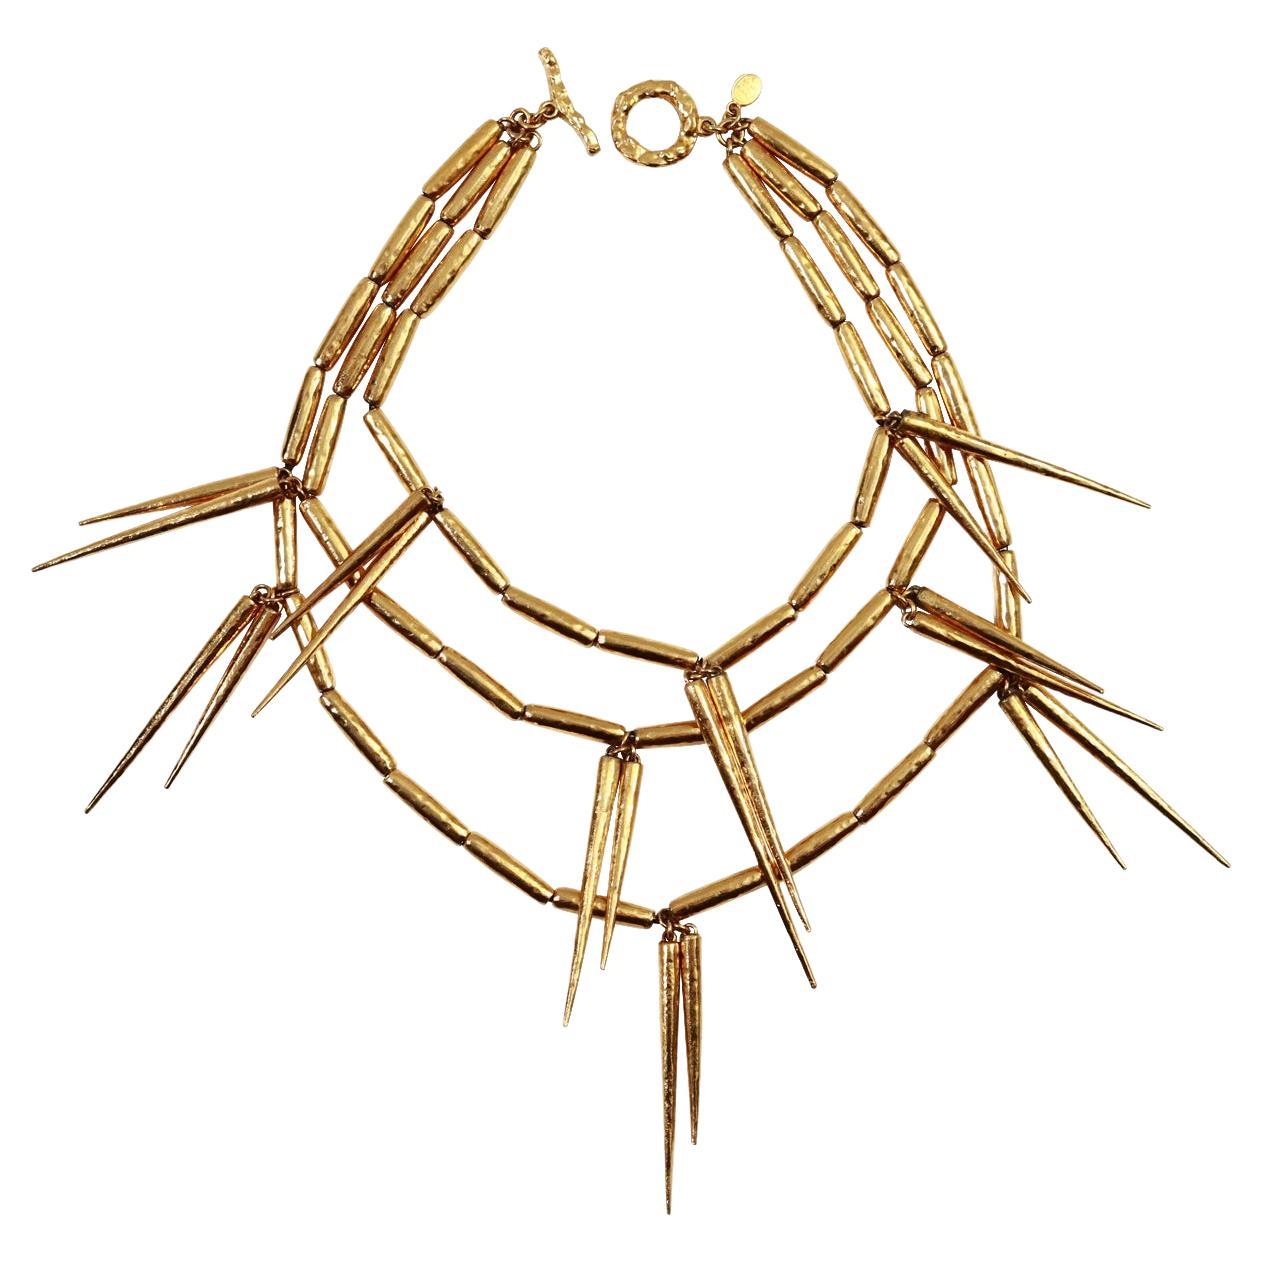 Vintage Christian Dior Gold Spike Necklace Circa 1980s.  Now this is the crème de la crème.  This is such a special piece and belongs  to a collector where the buyer understands the value of this piece. This is an iconic Christian Dior piece from